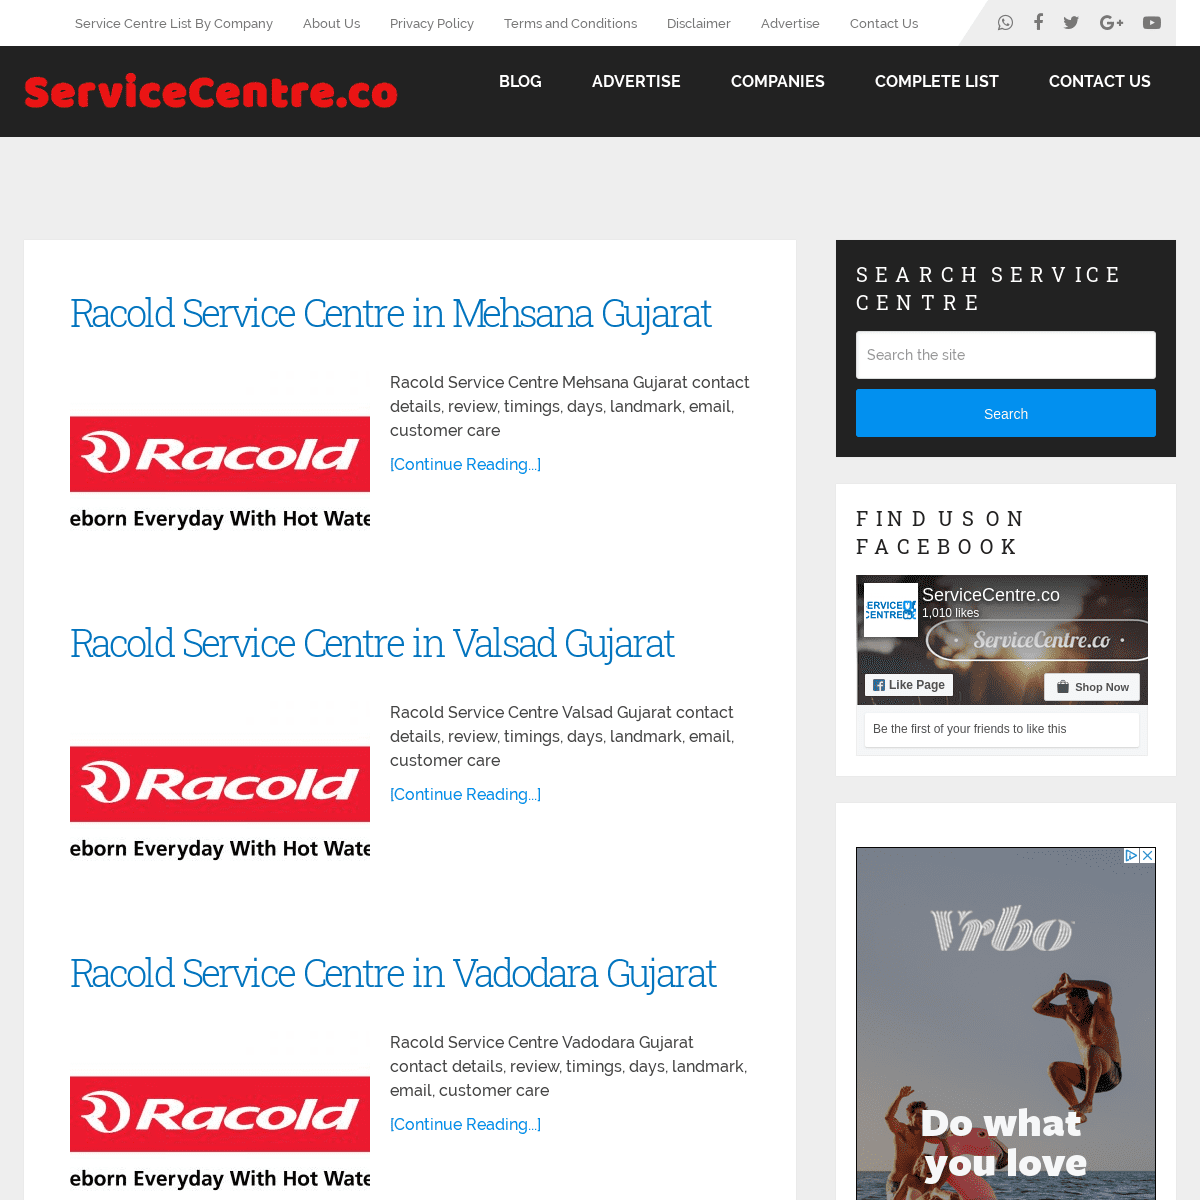 A complete backup of servicecentre.co